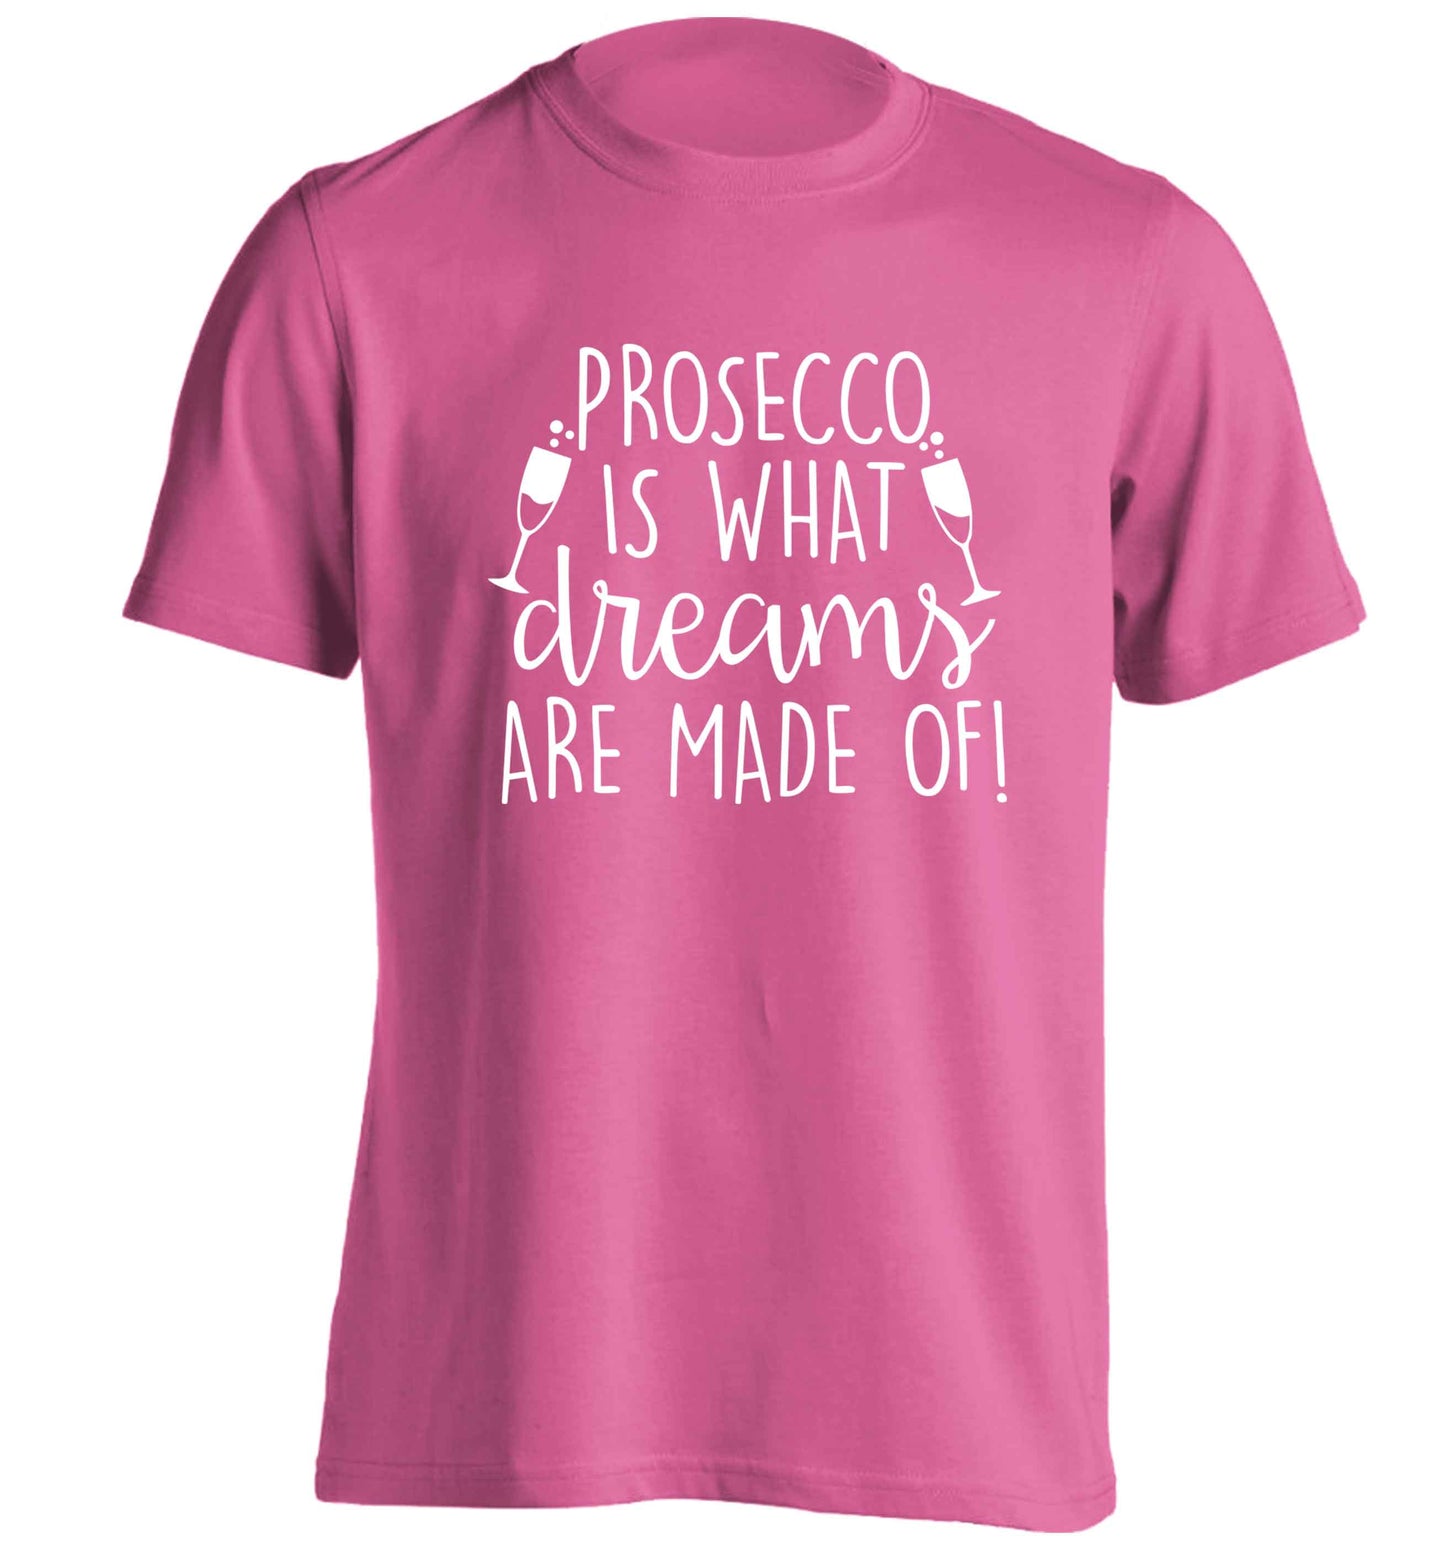 Prosecco is what dreams are made of adults unisex pink Tshirt 2XL